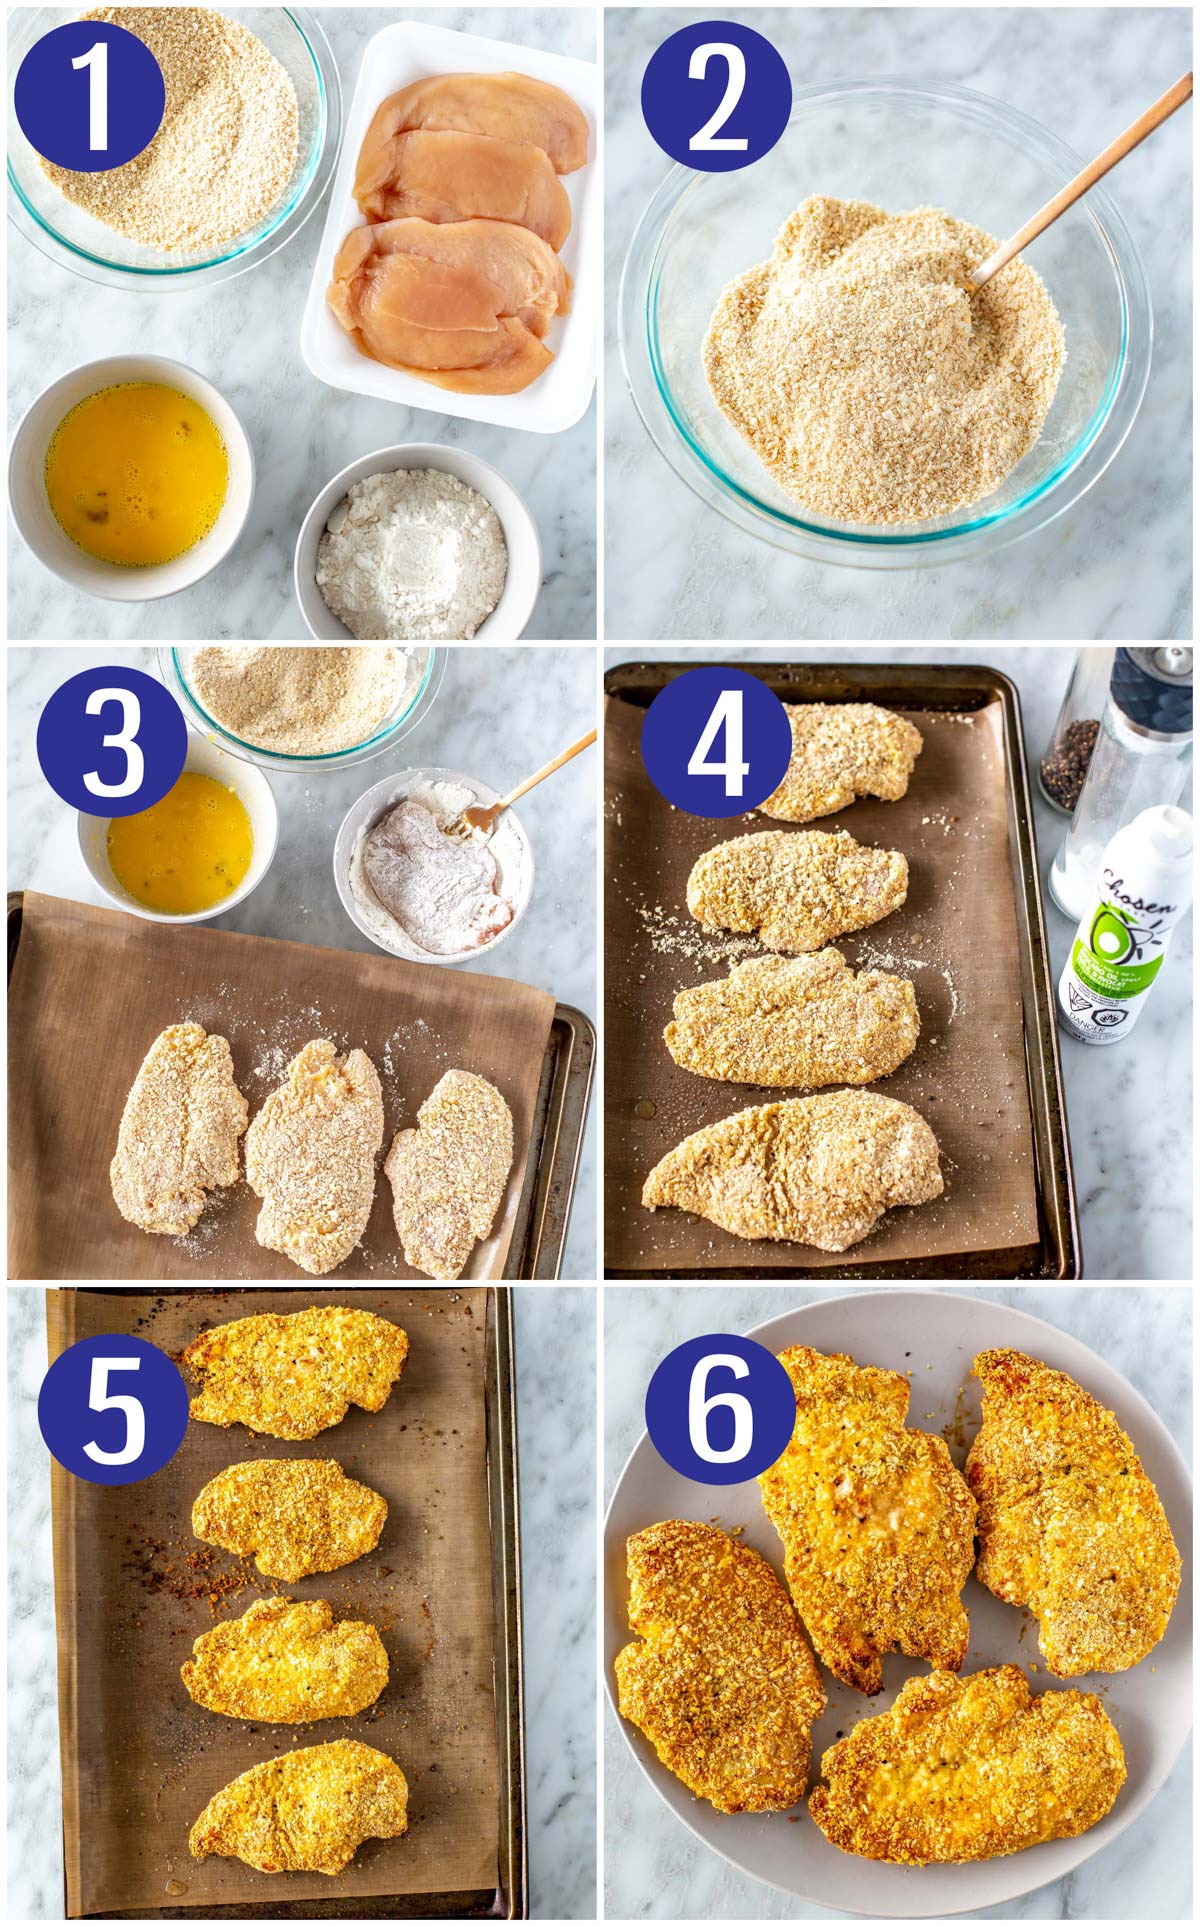 Step by step instructions collage for making chicken cutlets: Assemble ingredients, make breading, coat chicken cutlets in breading, spray cooking oil and season with salt and pepper, bake and serve.